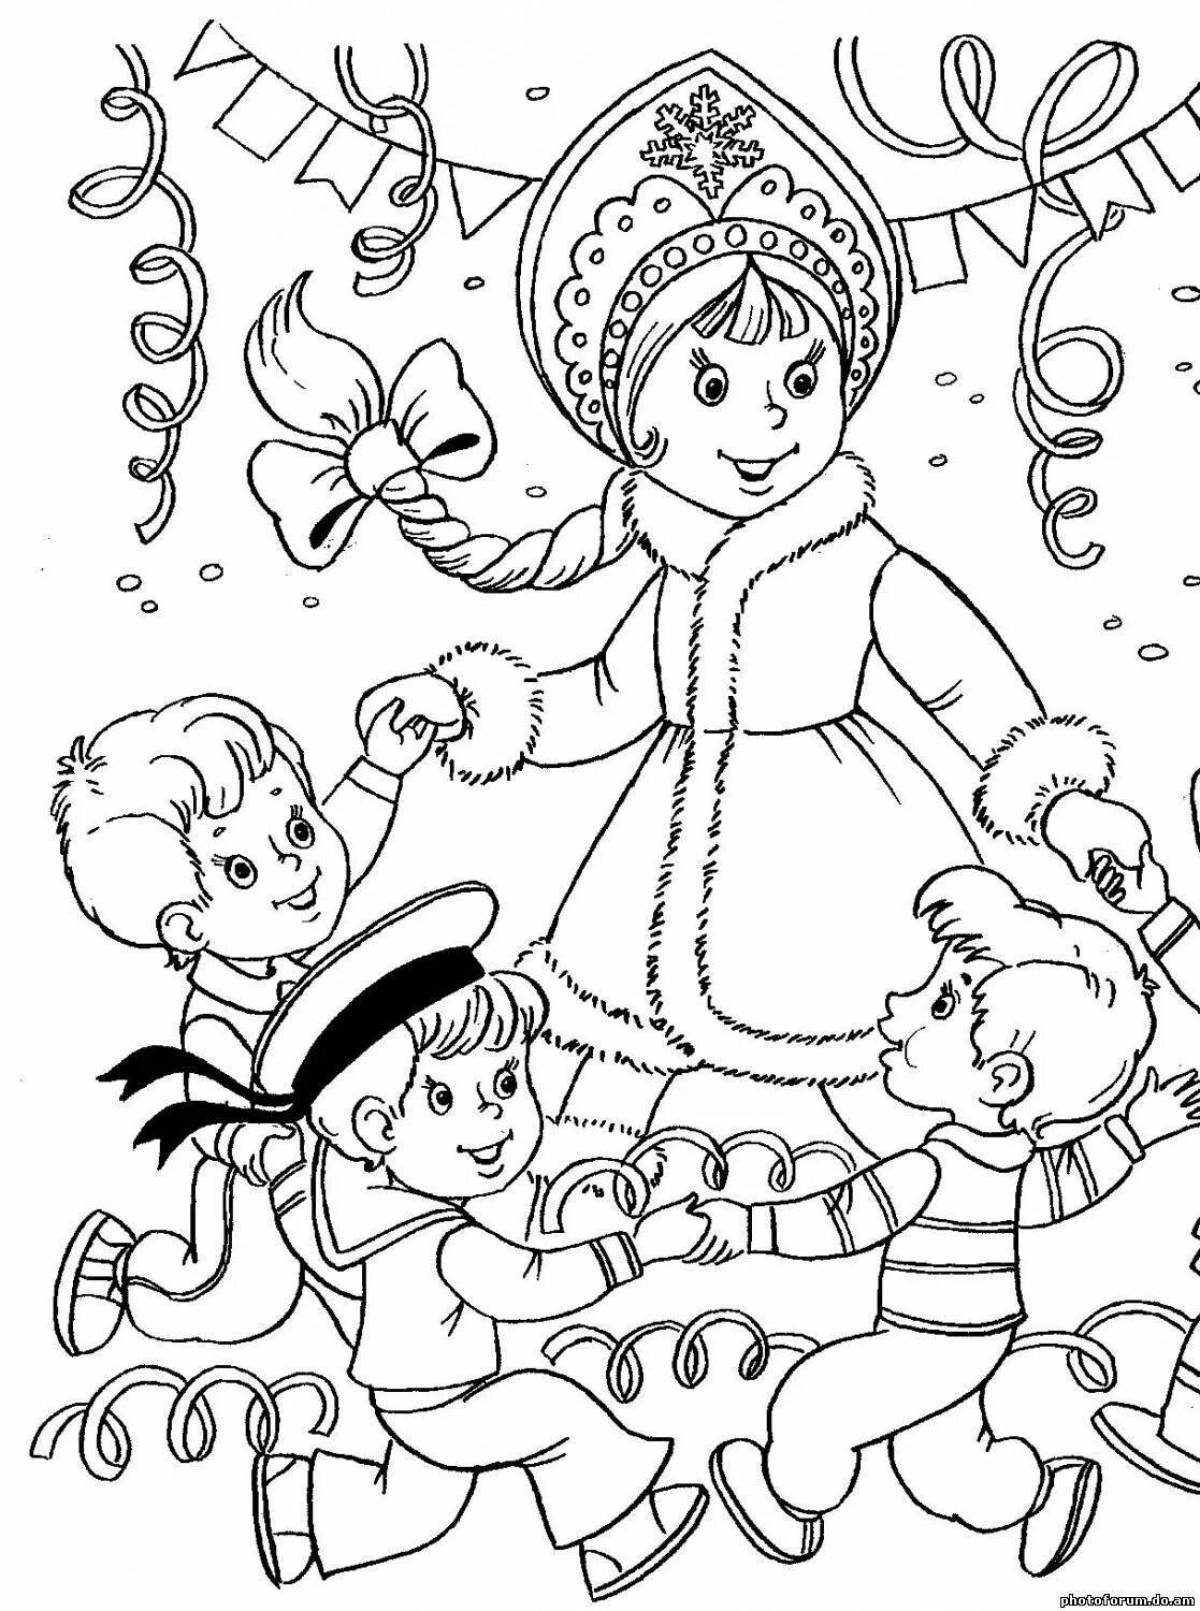 Violently coloring orthodox holidays winter book